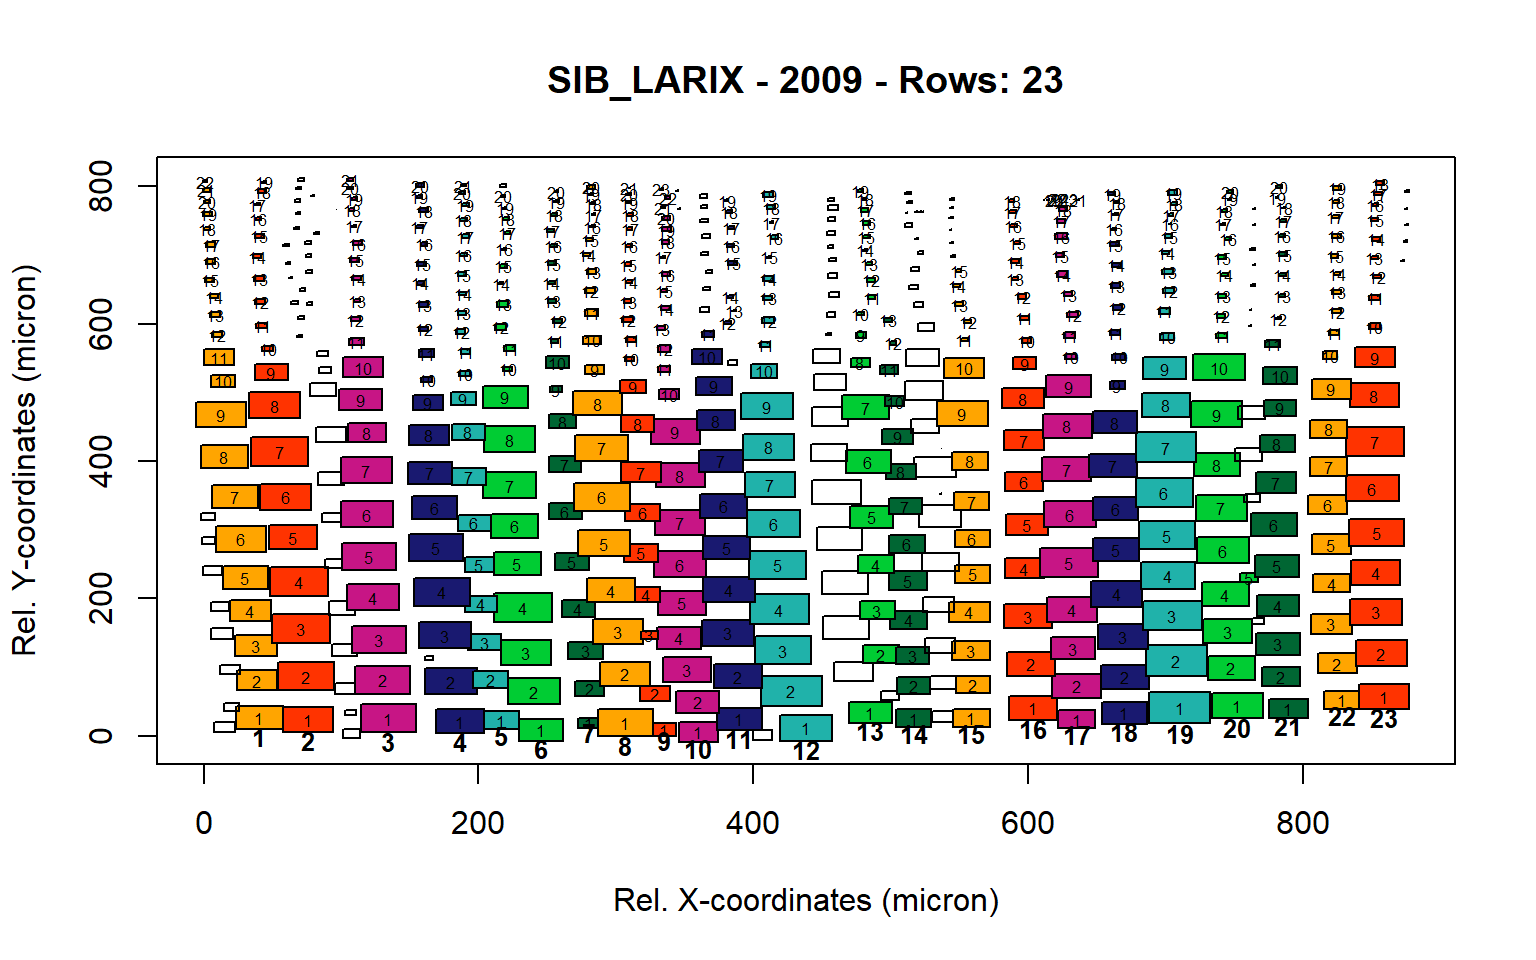 Standard plots generated by the write.output() function for Siberian Larix siberica (species="SIB_LARIX"), including 2007, 2008, 2009 and 2010.